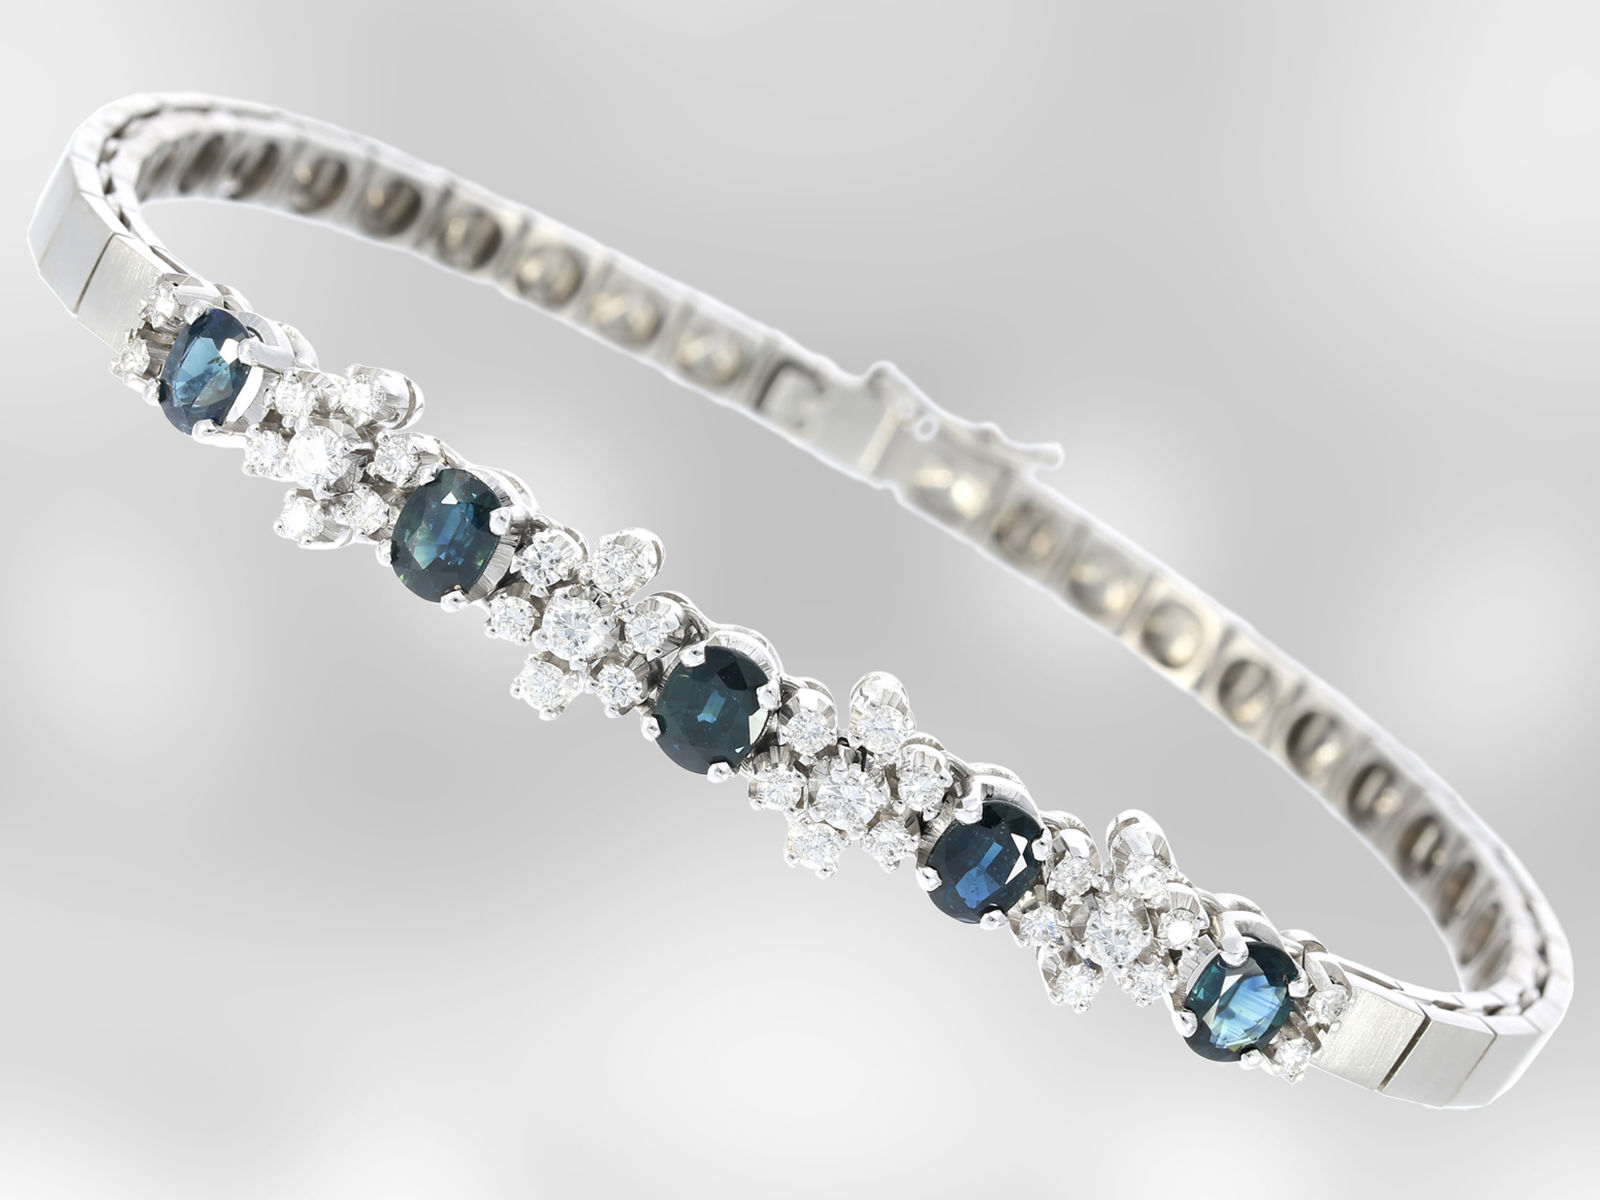 Bracelet: decorative white gold vintage bracelet with sapphires and diamonds, total approx. 1.84ct, 